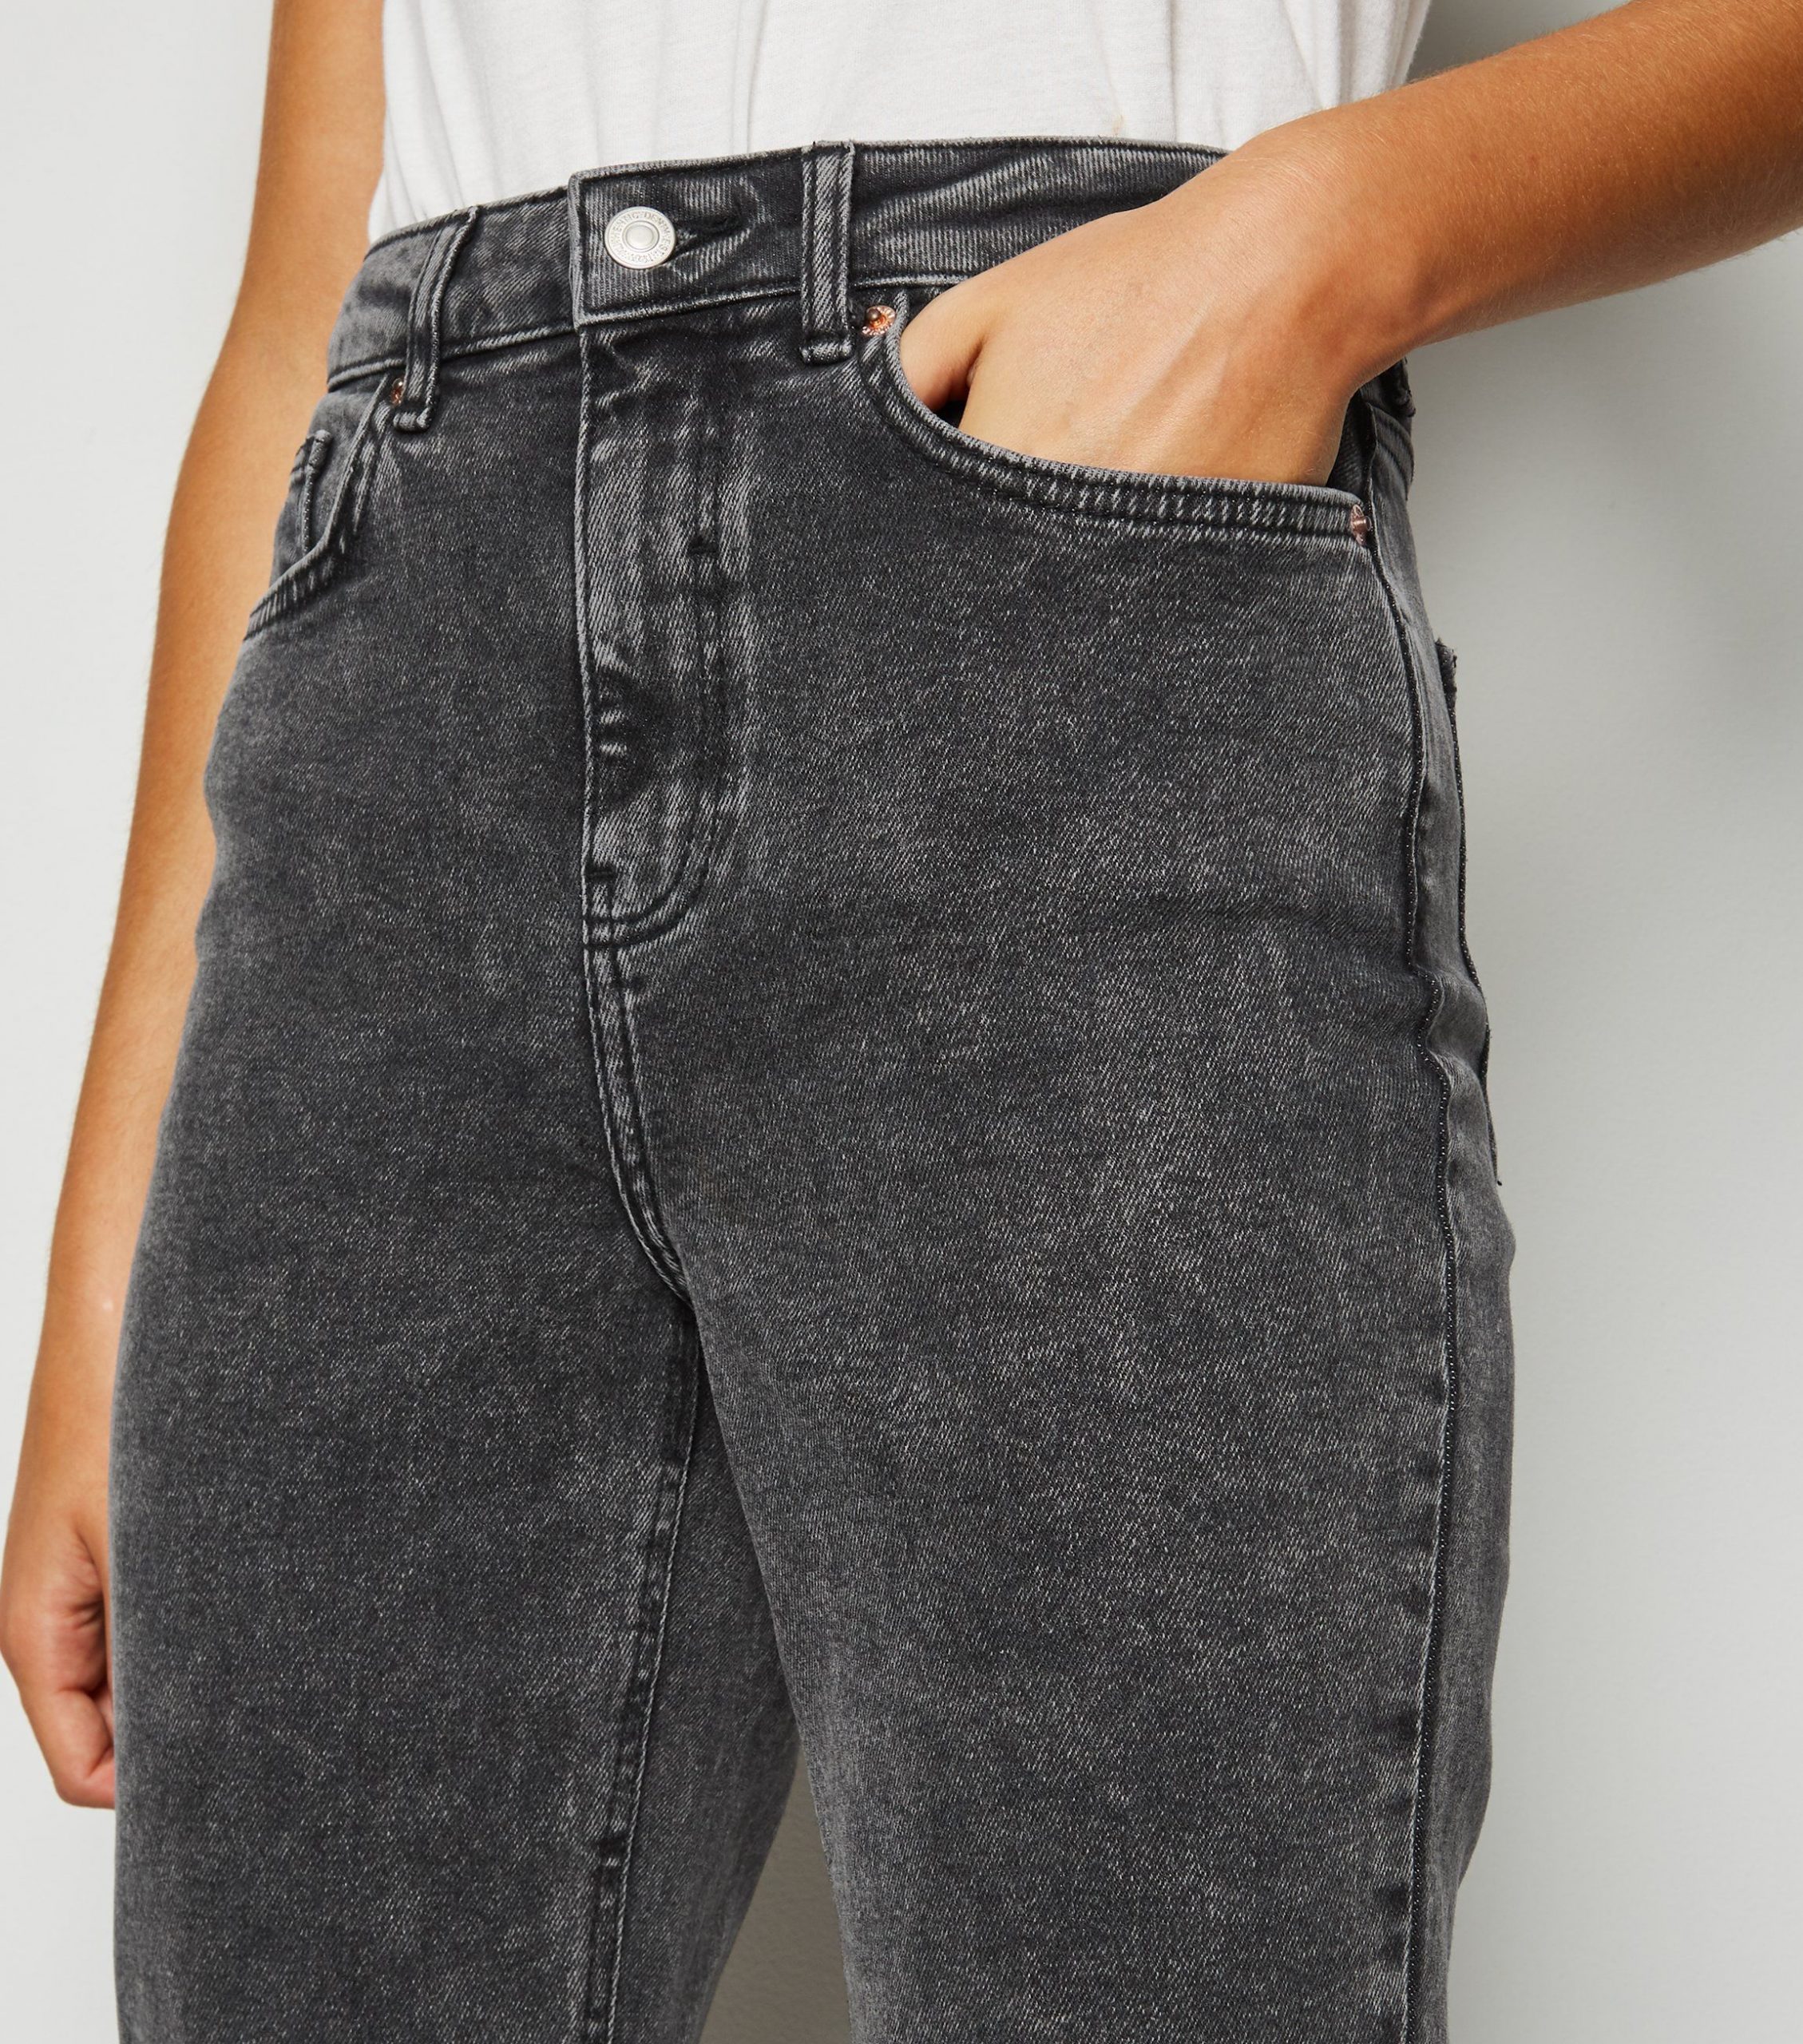 dark grey mom jeans outfit - OFF-54% >Free Delivery